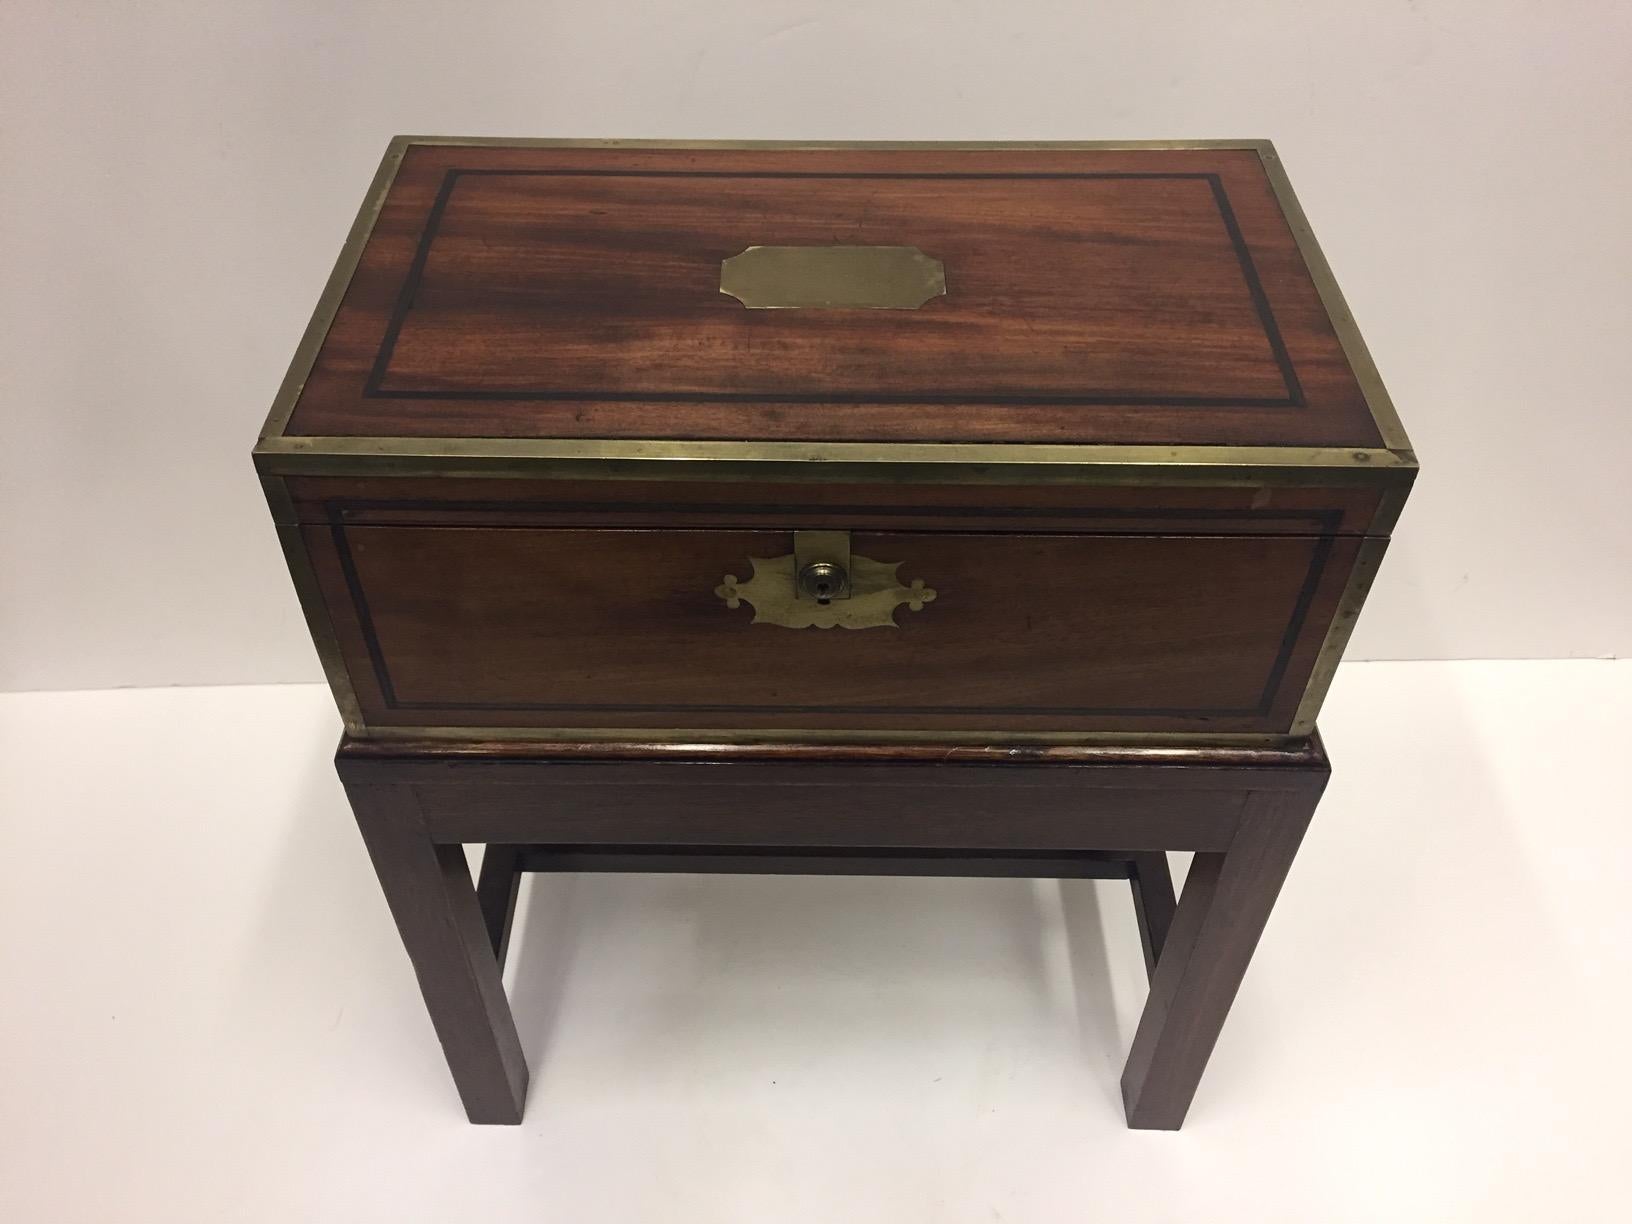 Handsome English 19th century mahogany brass bound lap desk on custom stand makes a rich and functional end or side table with storage space inside.  Surface area of the desk on stand is 21 inches wide by 18 inches deep.